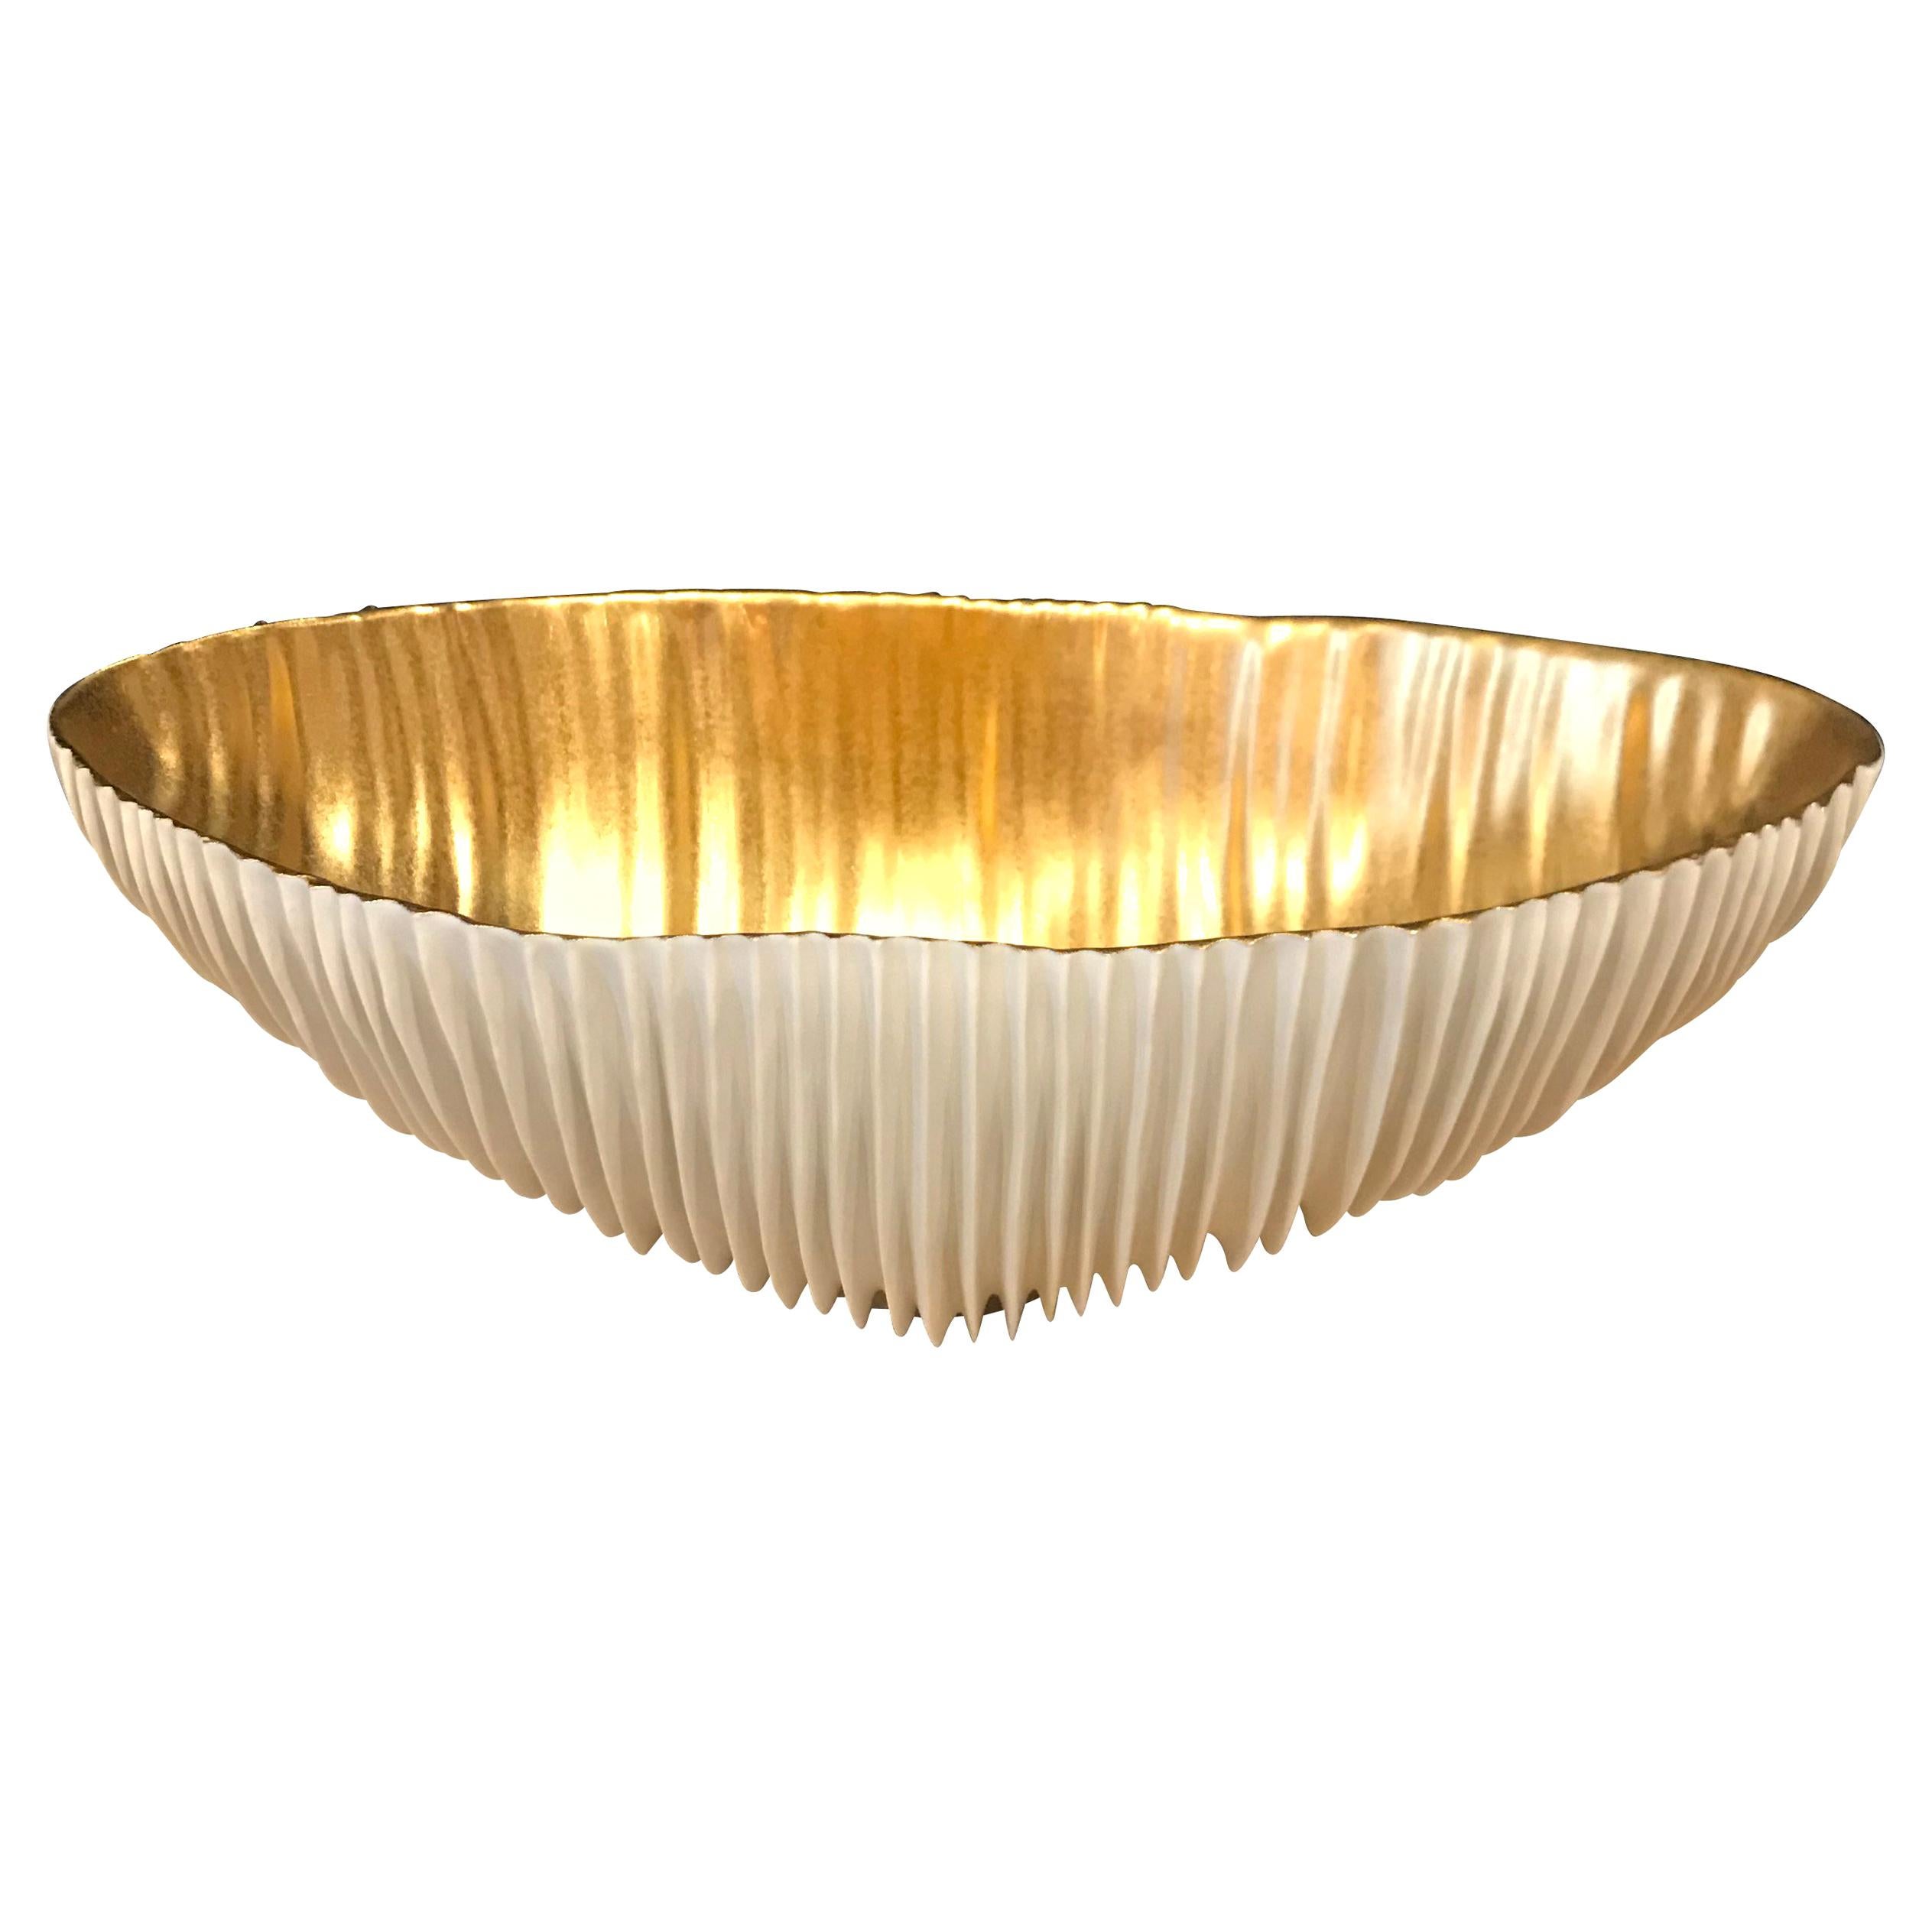 White Porcelain Bowl with Gold Leaf Inside, Italy, Contemporary